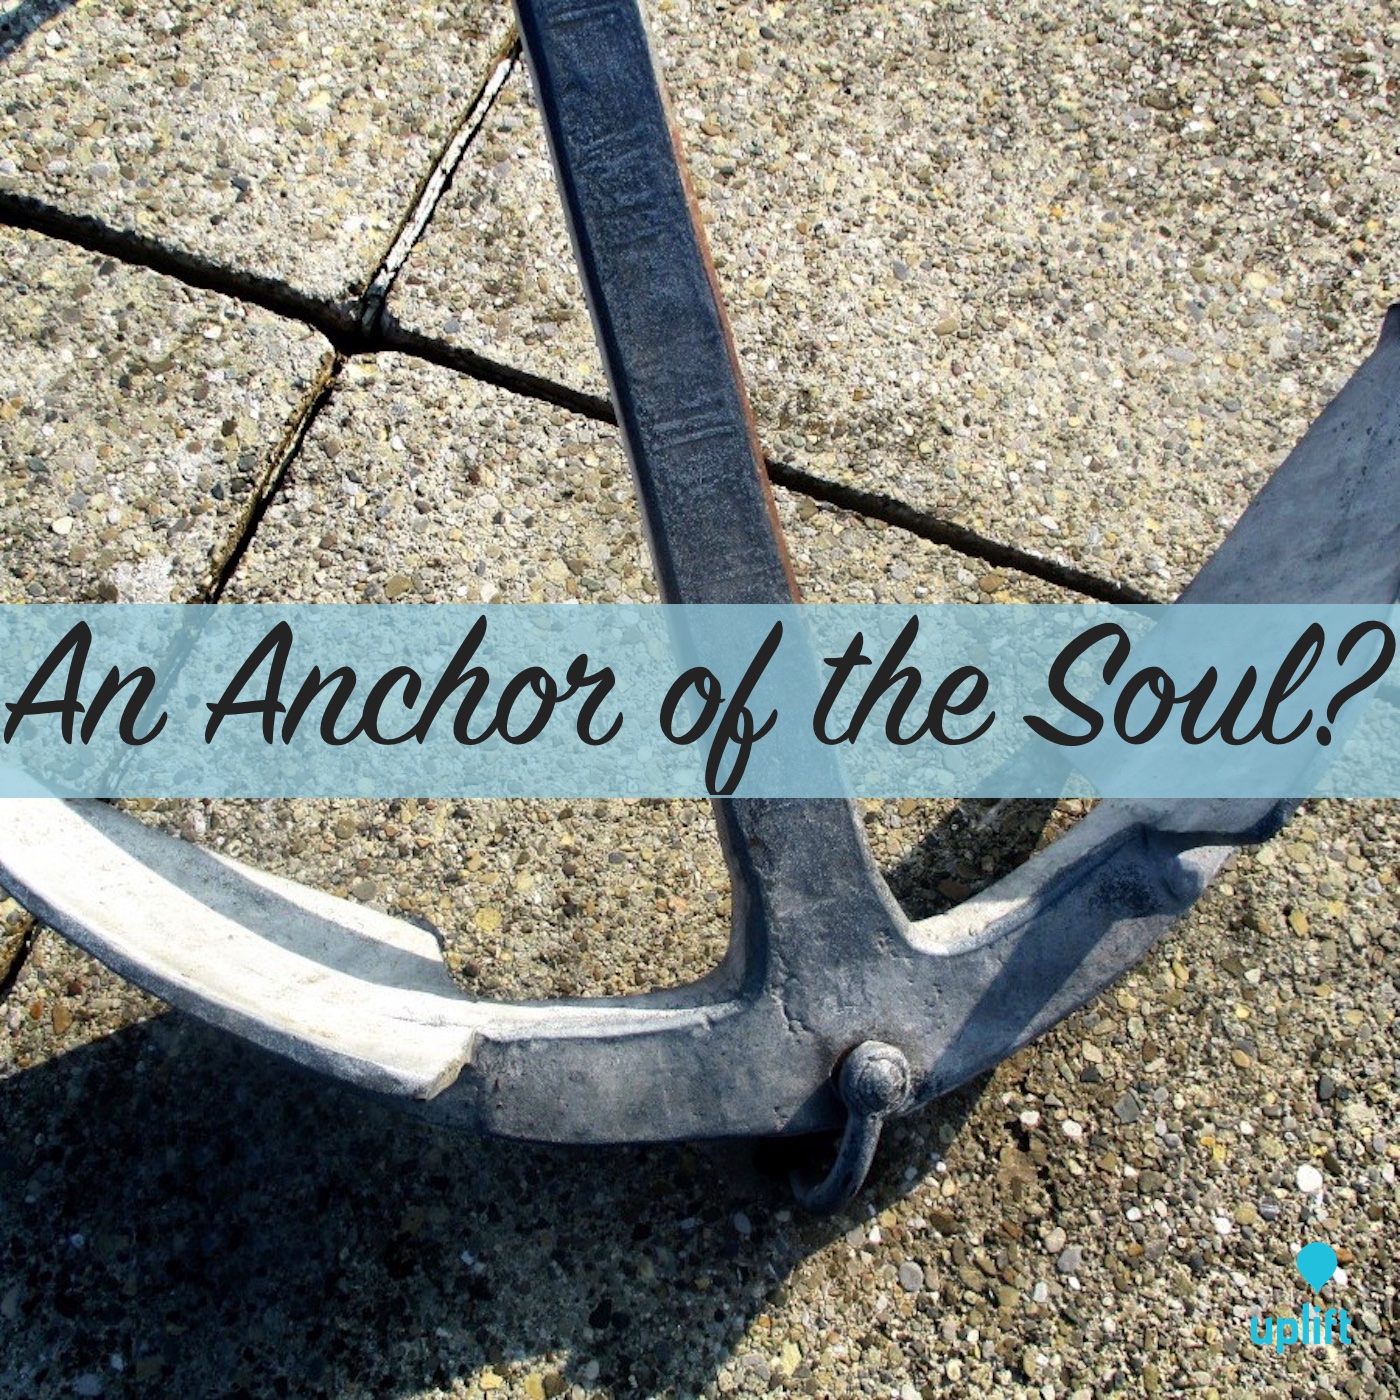 Episode 23: An Anchor of the Soul?